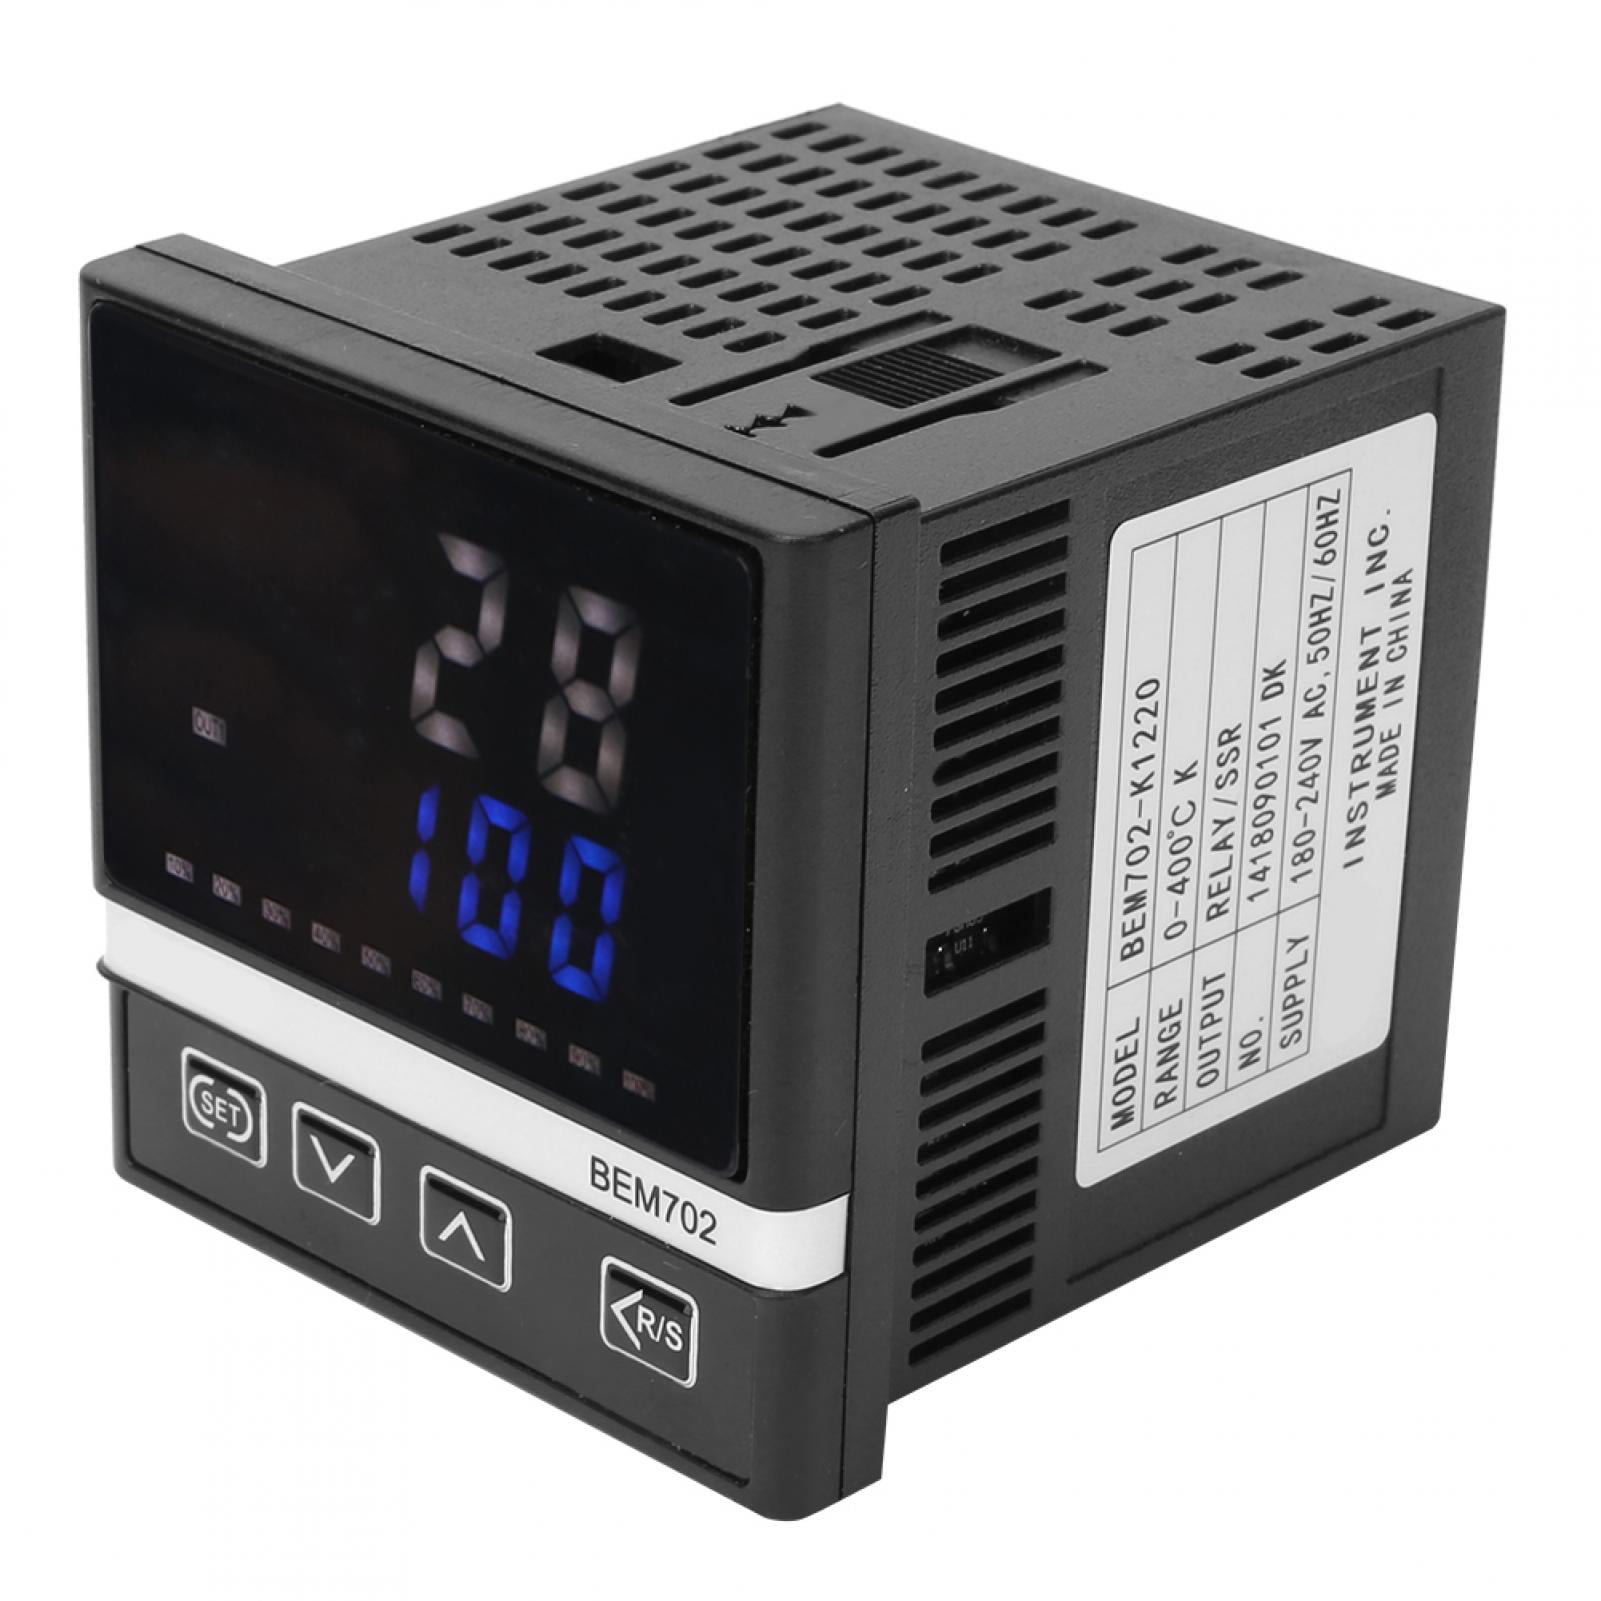 ovens industrial boilers GUOCAO Relay Module Temperature Controller 180-240VAC,K-Type LED Digital Display Temperature Controller,RELAY/SSR,BERM BEM702-K1220,Suitable for various heating furnaces fu